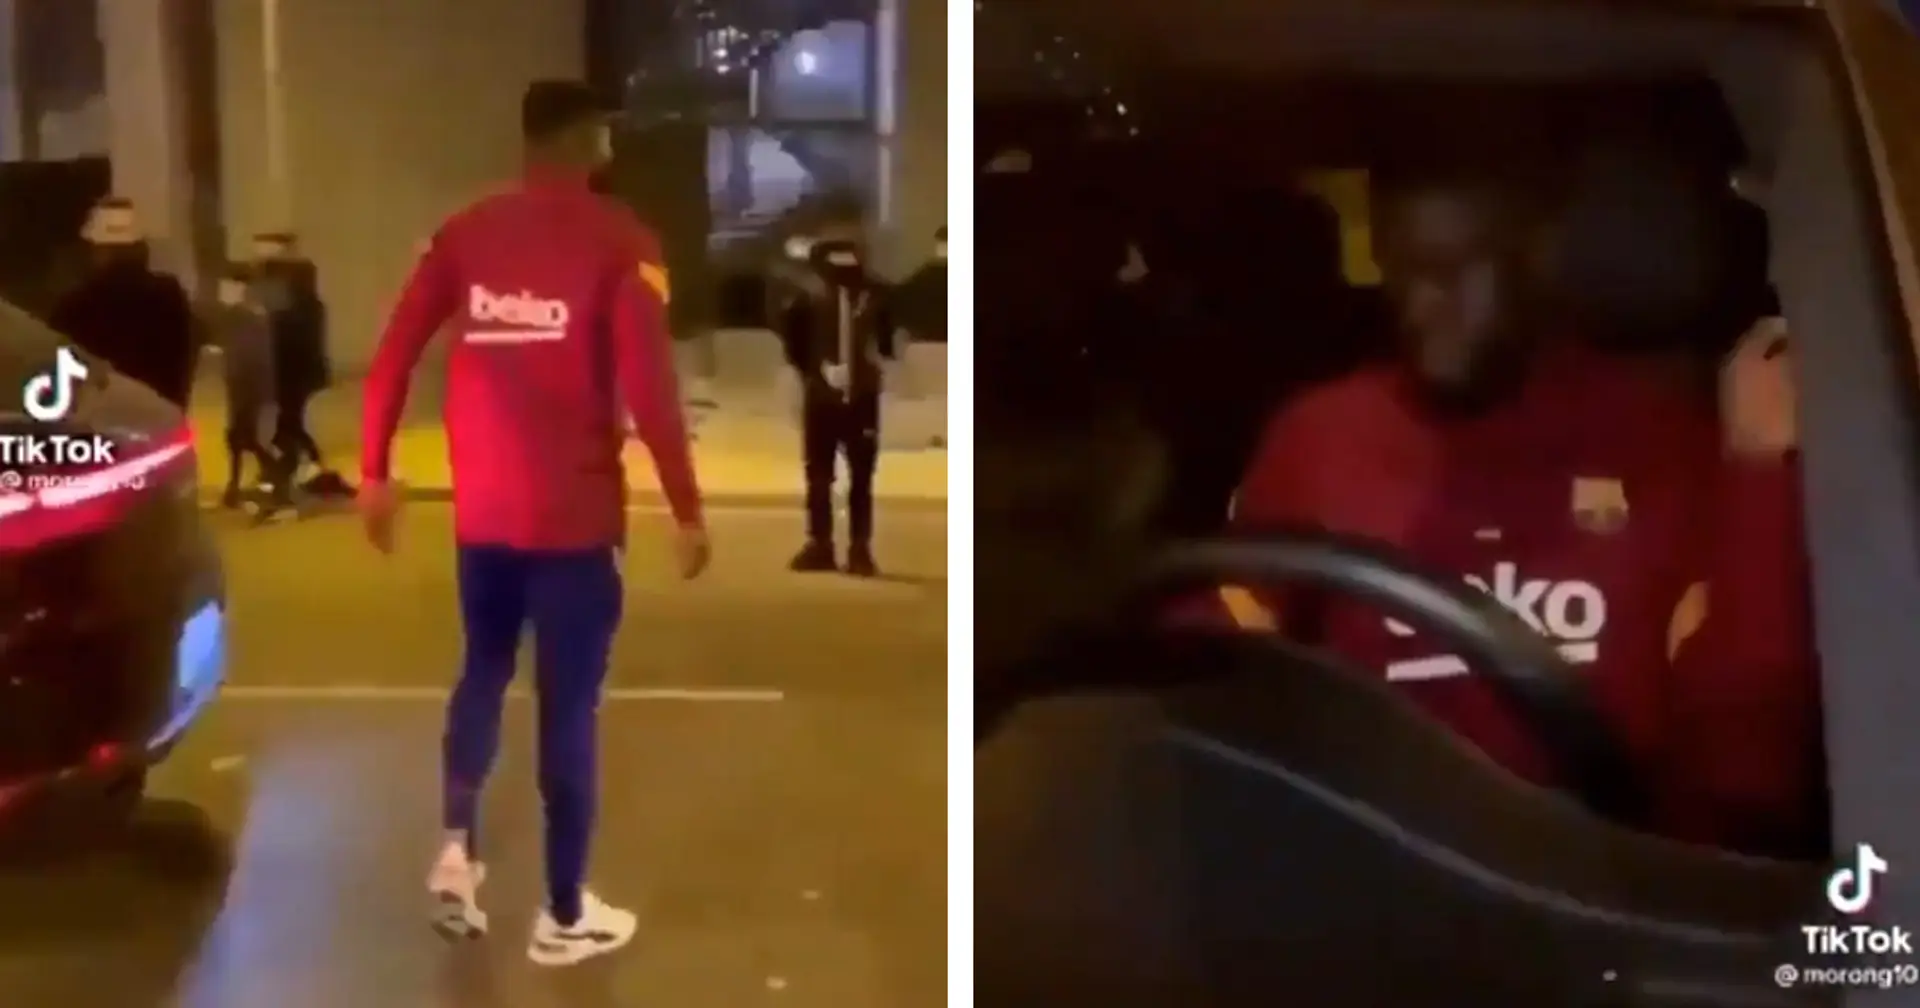 'Go to Barca B': Umtiti becomes latest victim of abuse from tiktokers